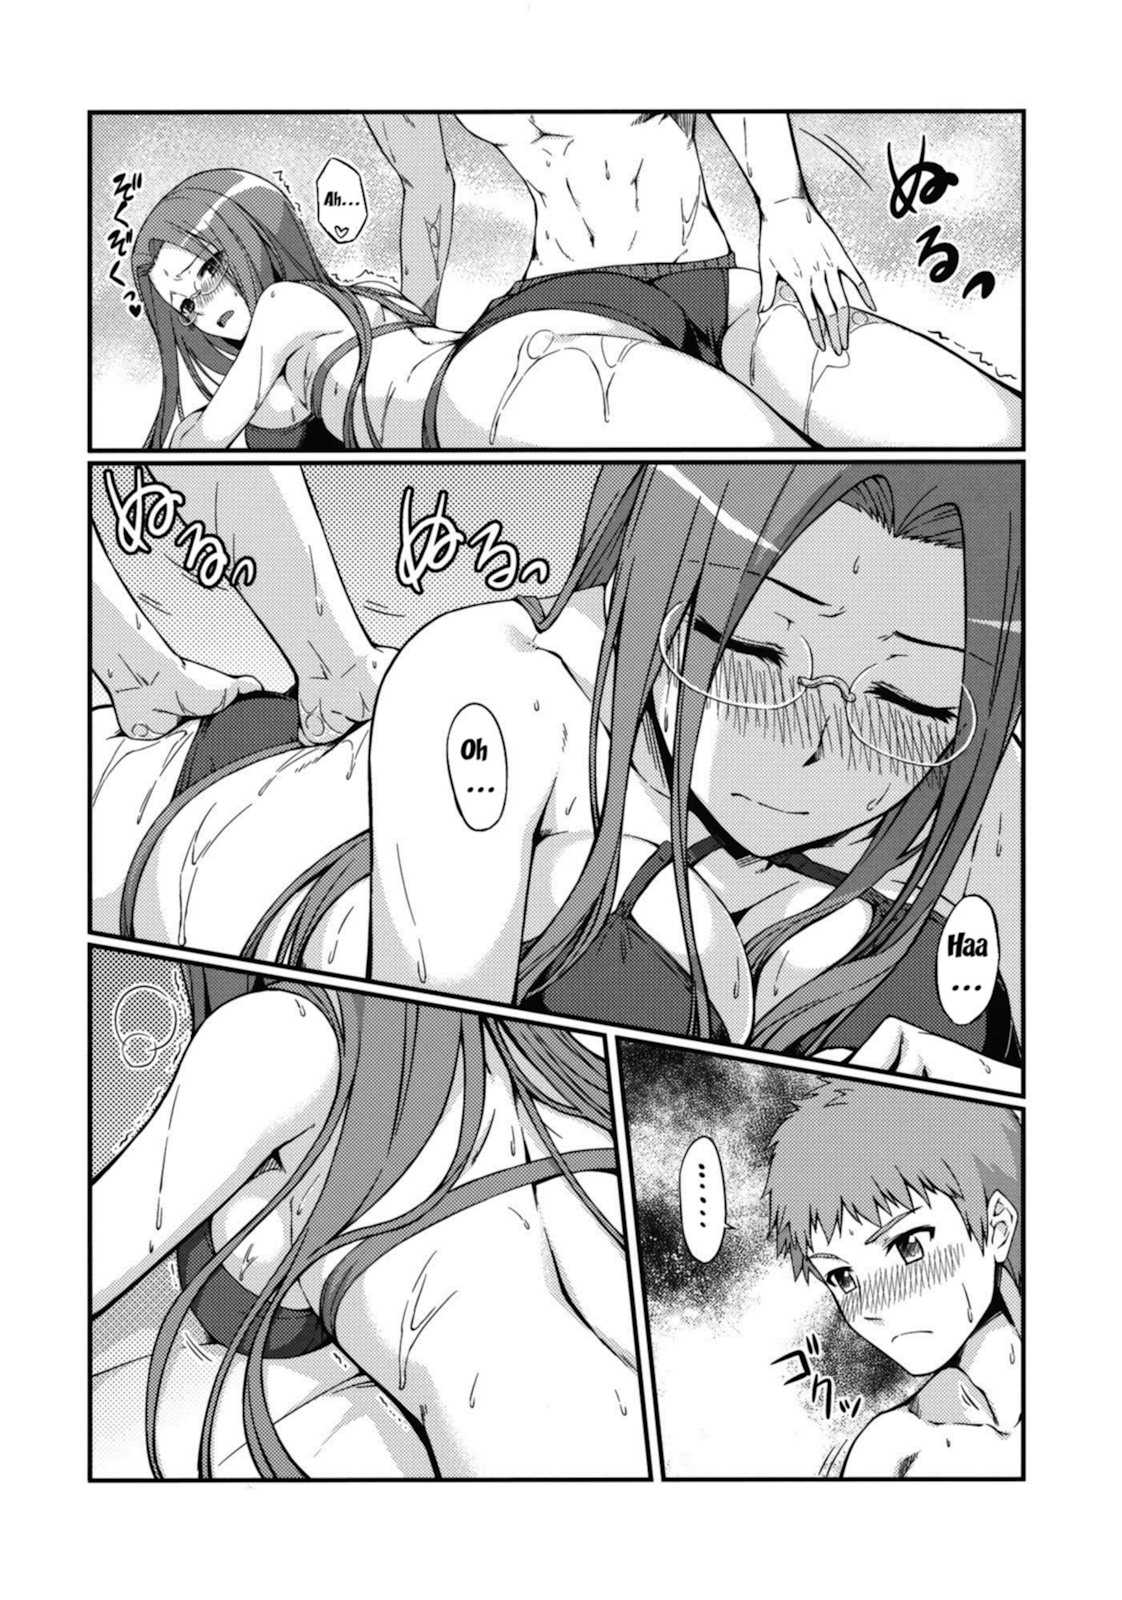 (C81)[S.S.L (Yanagi)] Rider-san and the Beach (Fate Stay/Night) [Eng] [doujin-moe.us, CGRascal]} (コミックマーケット 81) [S.S.L (柳)] ライダーさんと海水浴 (フェイトステイナイト) [英訳]